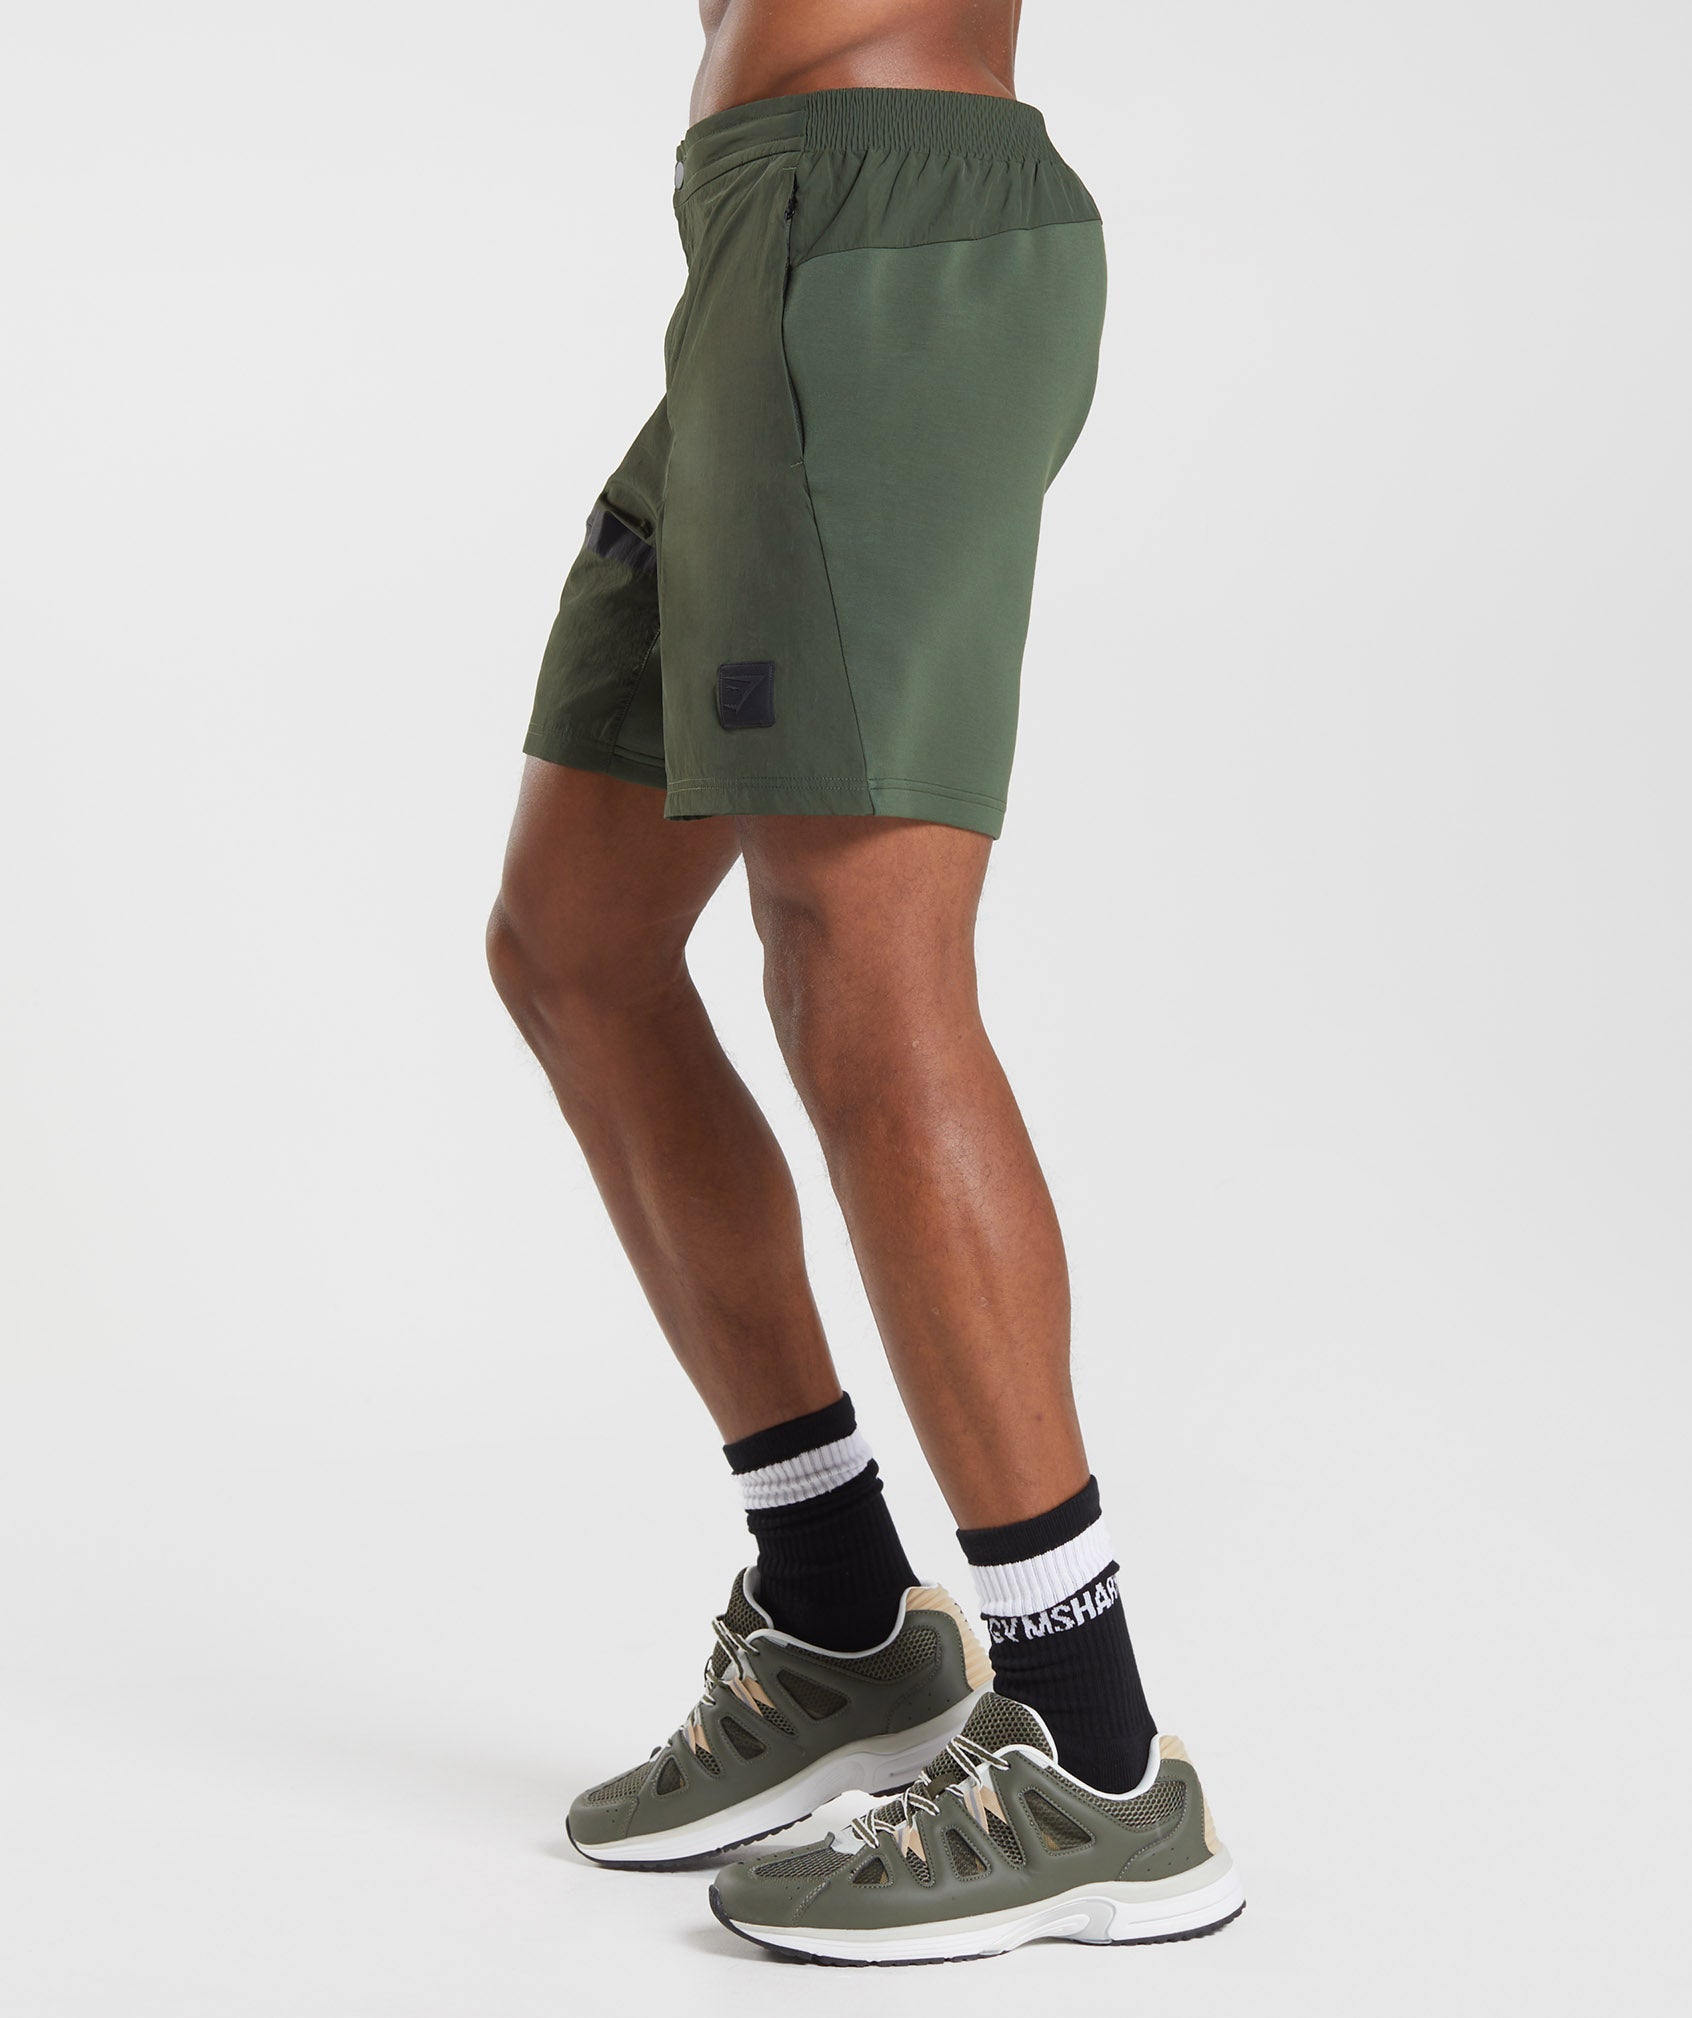 Retake Woven 7" Shorts in Moss Olive - view 3